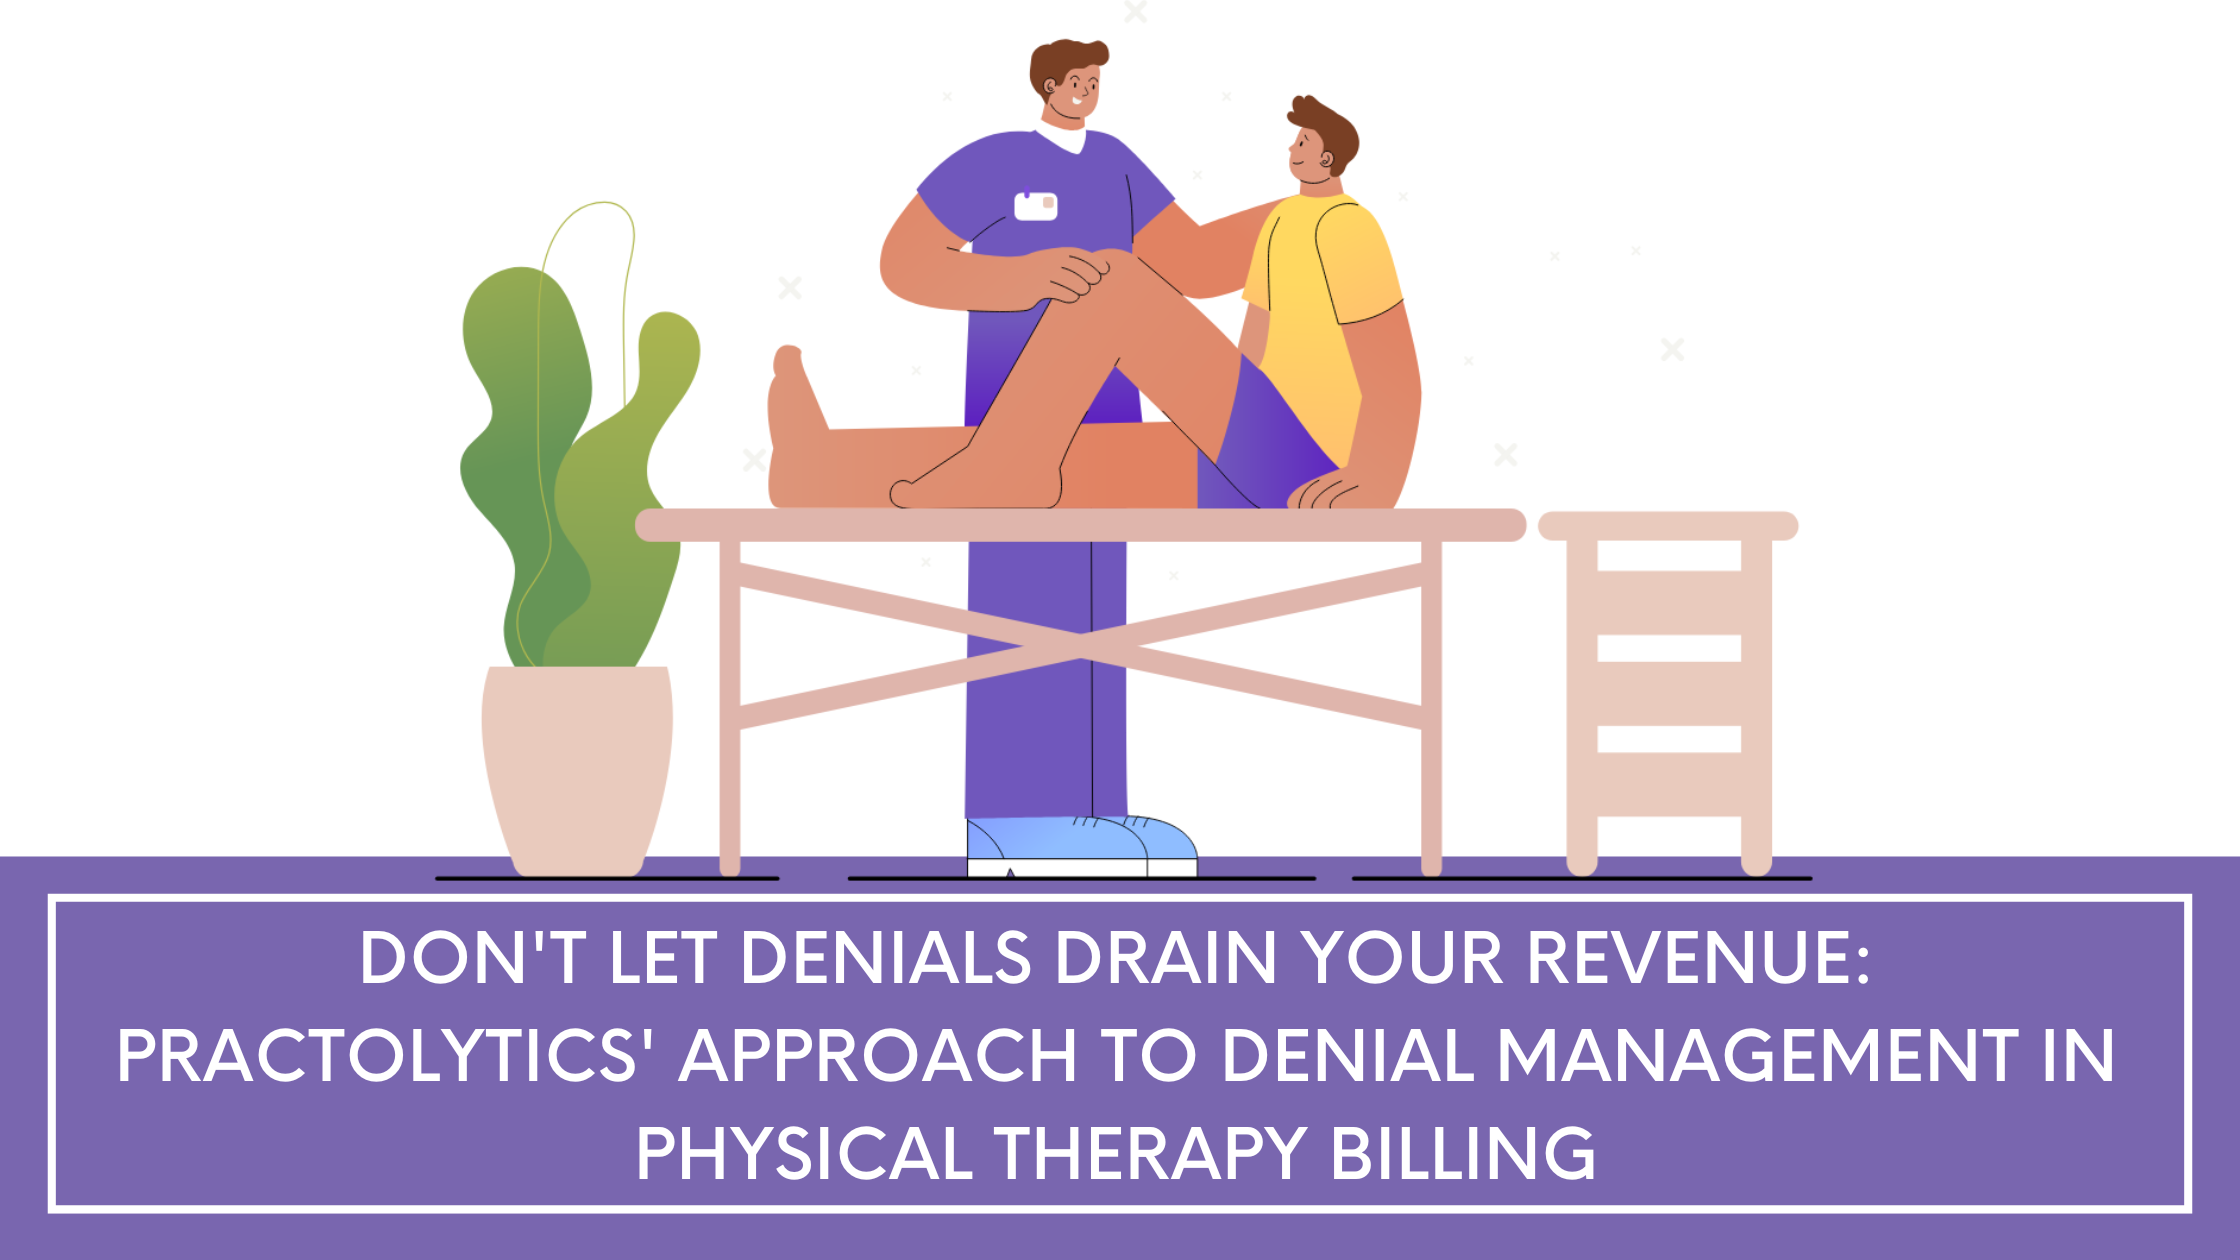 Denial Management for Physical Therapy Billing